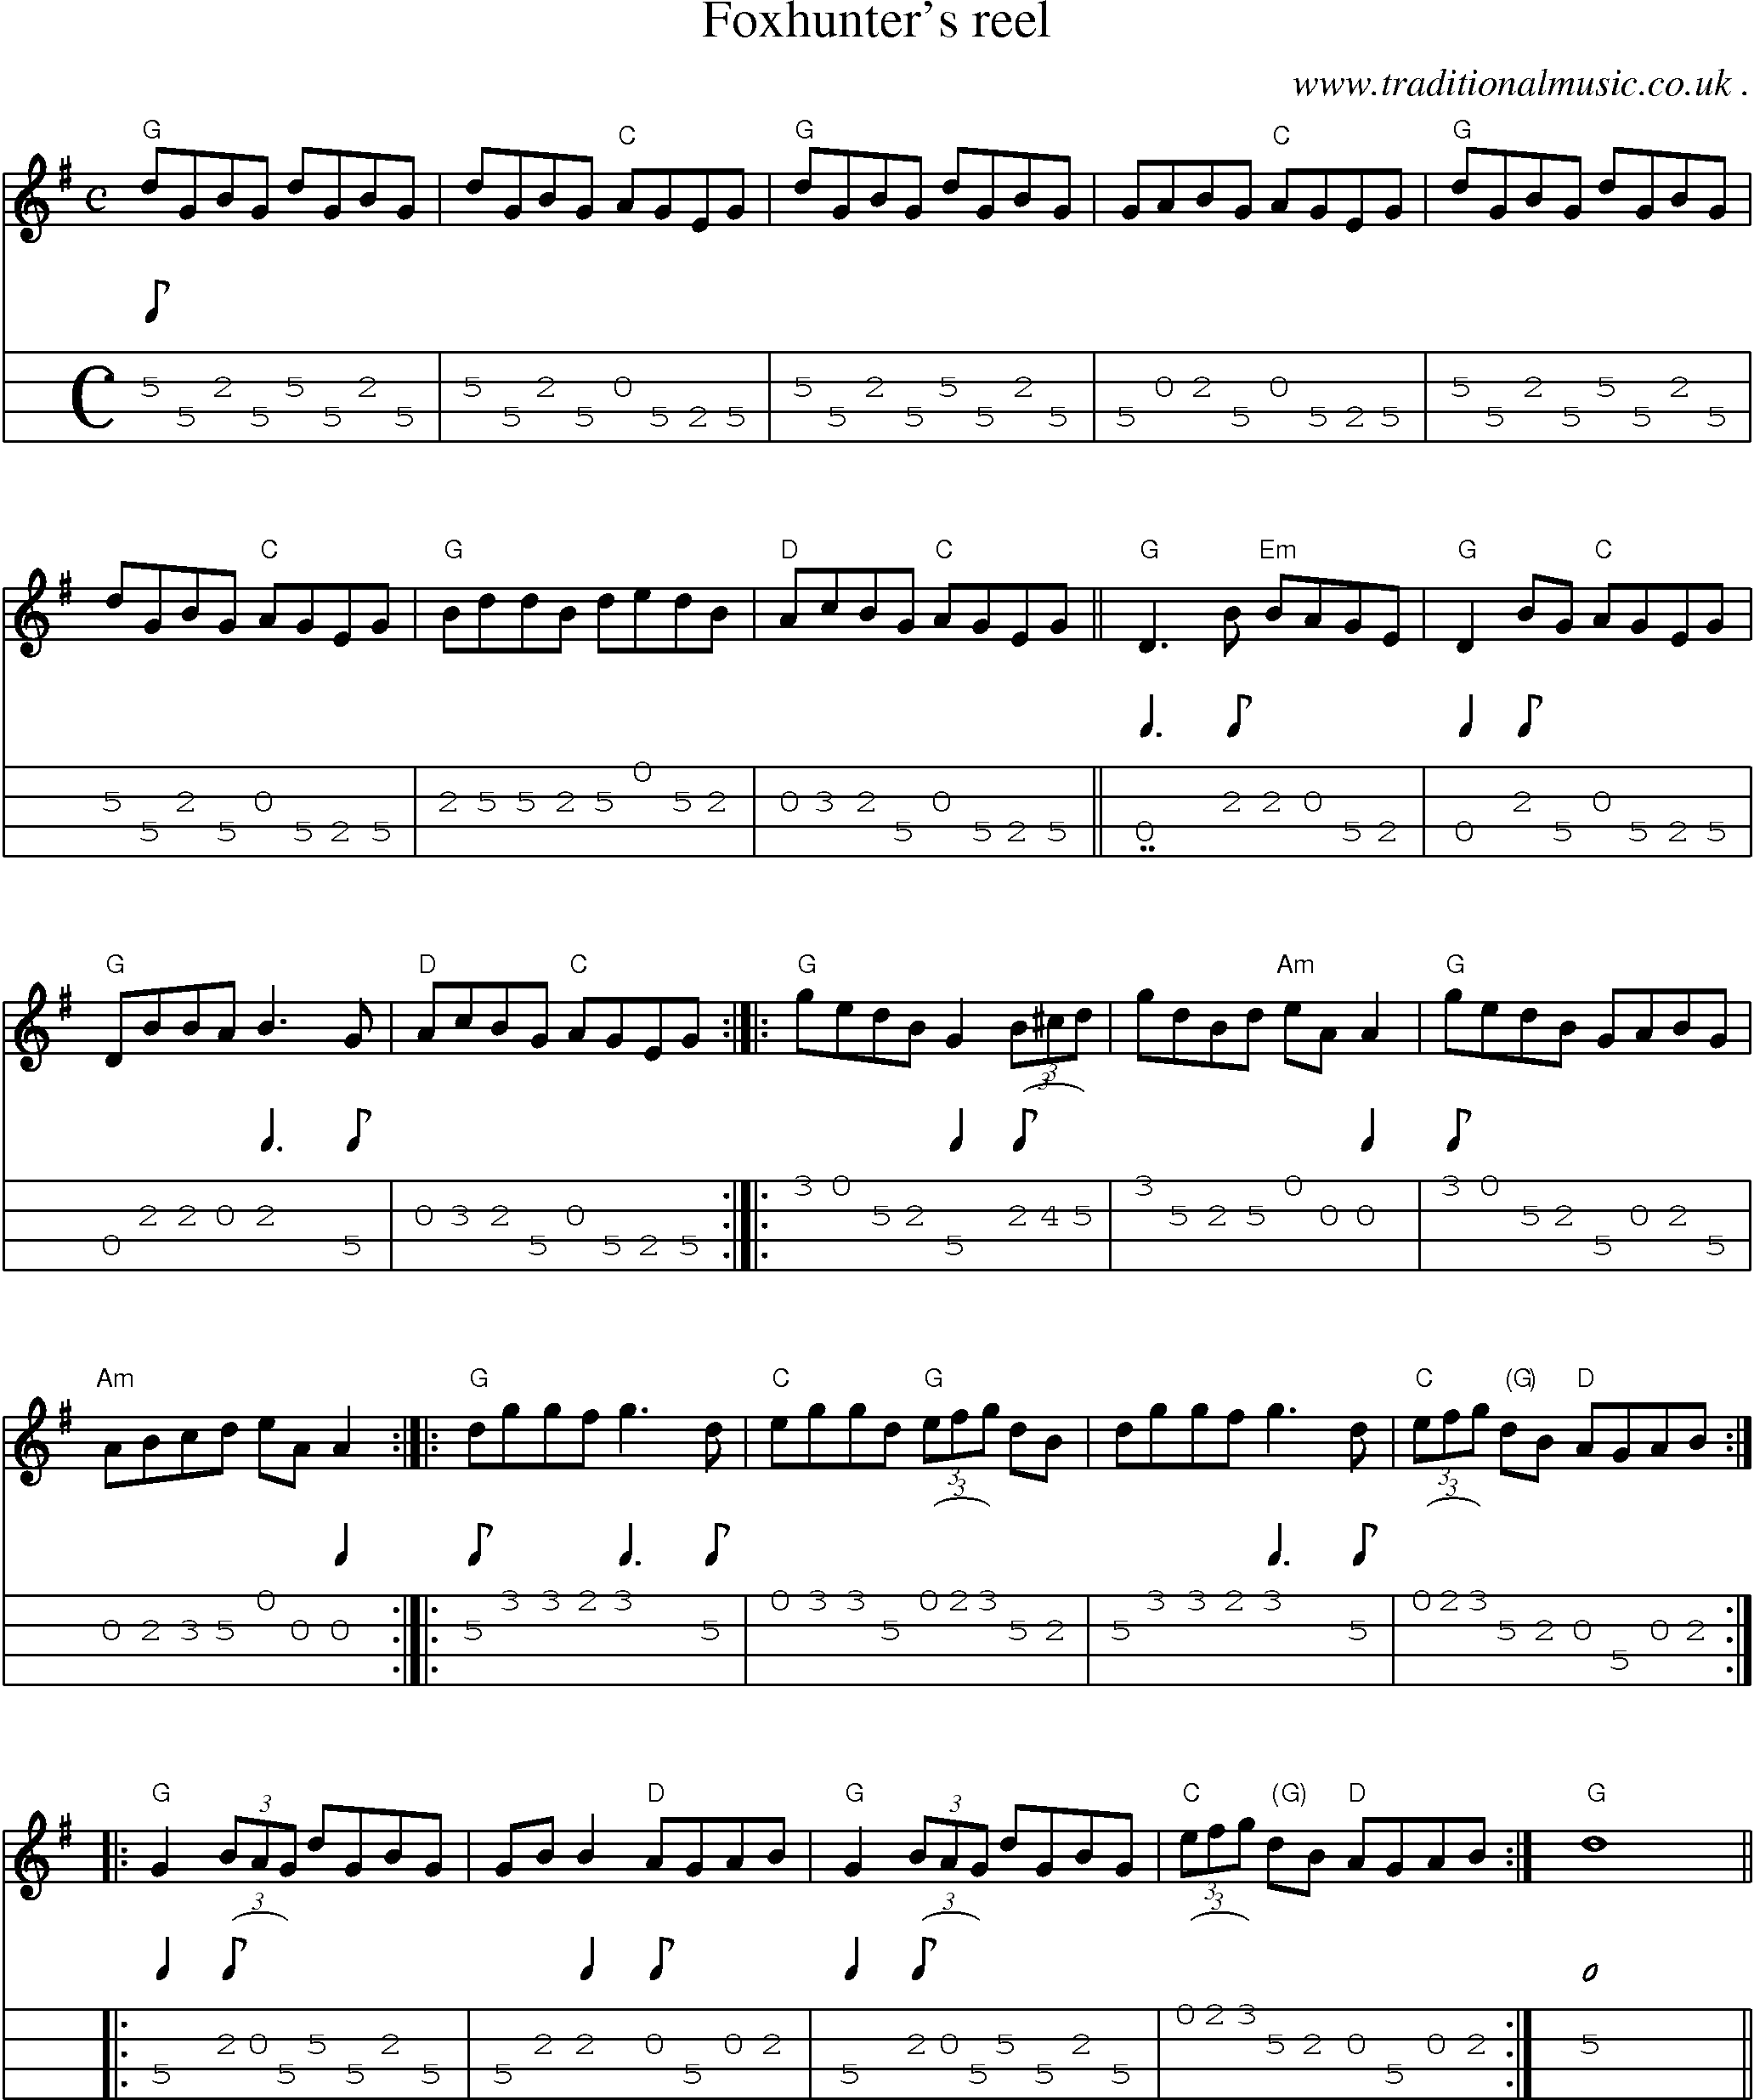 Music Score and Guitar Tabs for Foxhunters Reel